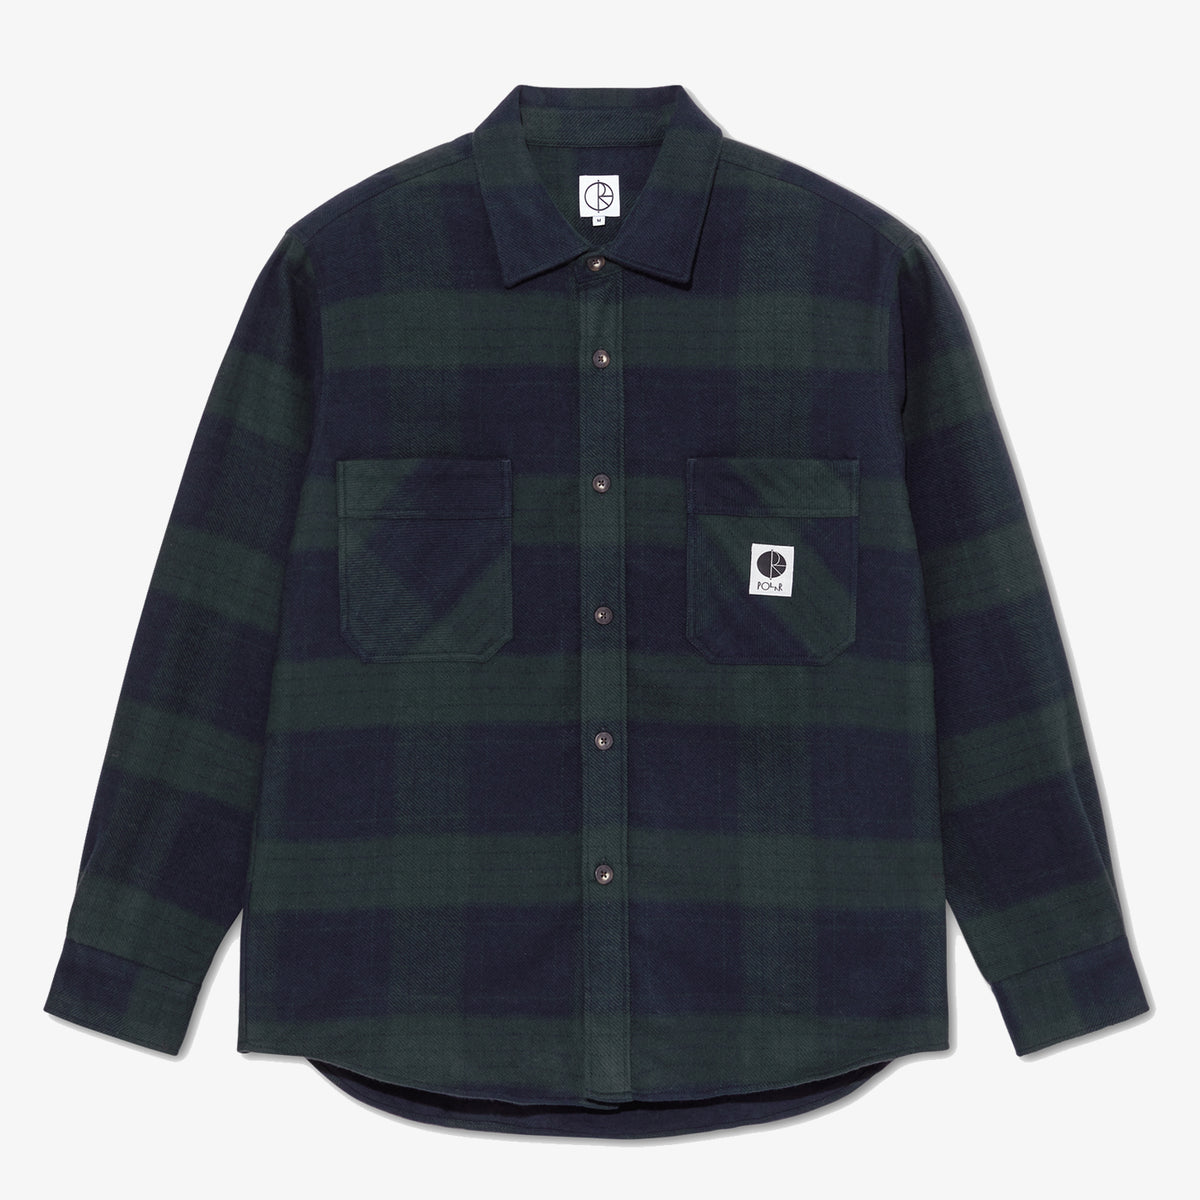 Flannel Shirt (Navy/Teal)